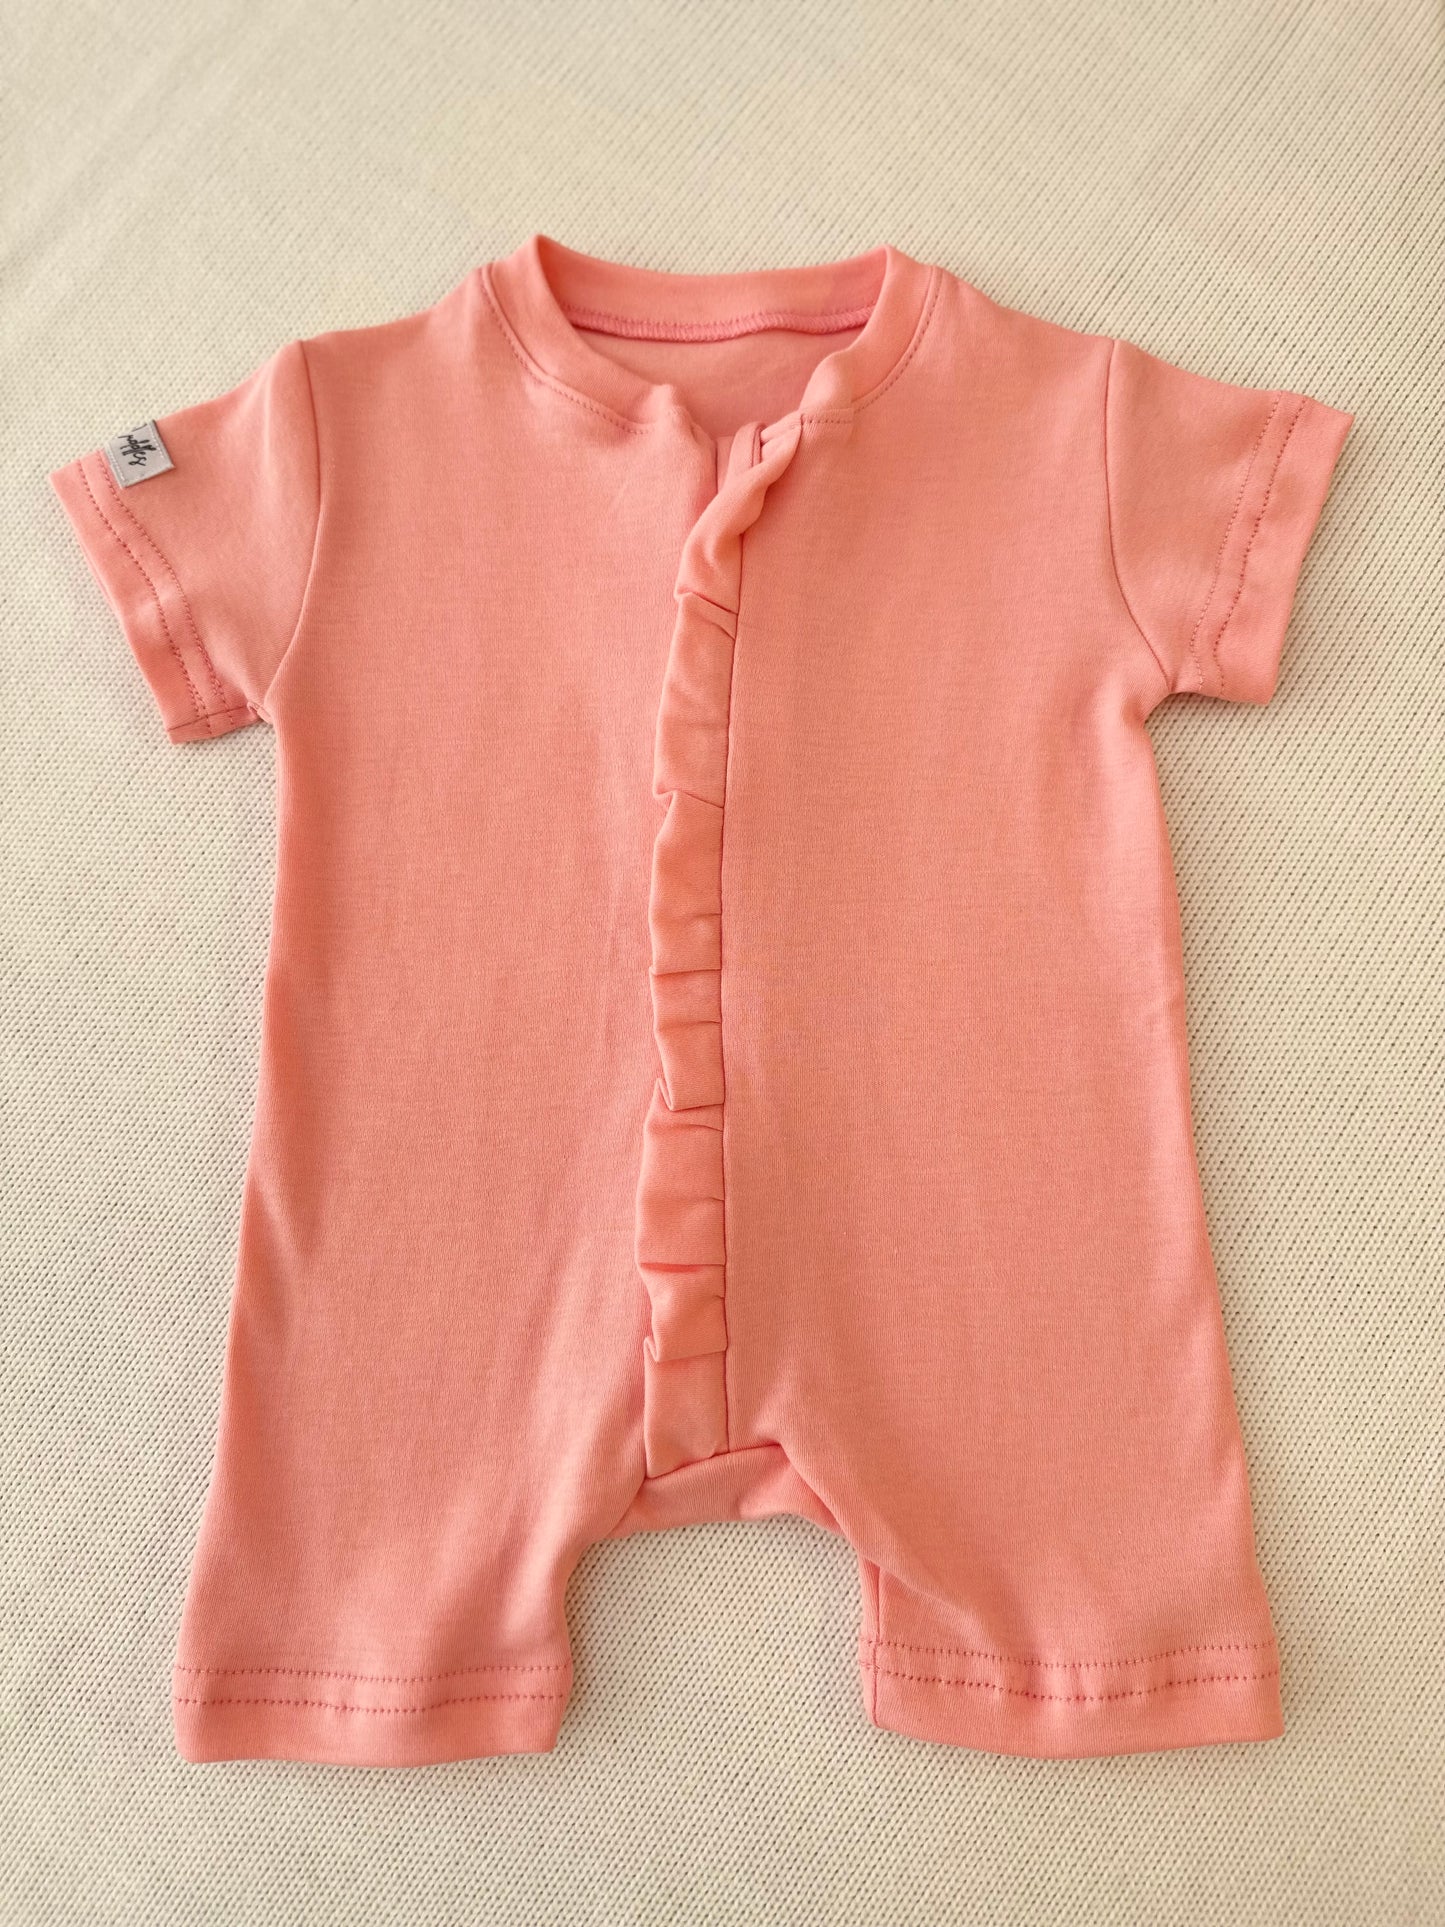 PINKIE  short sleeve with ruffles - Baby Overall